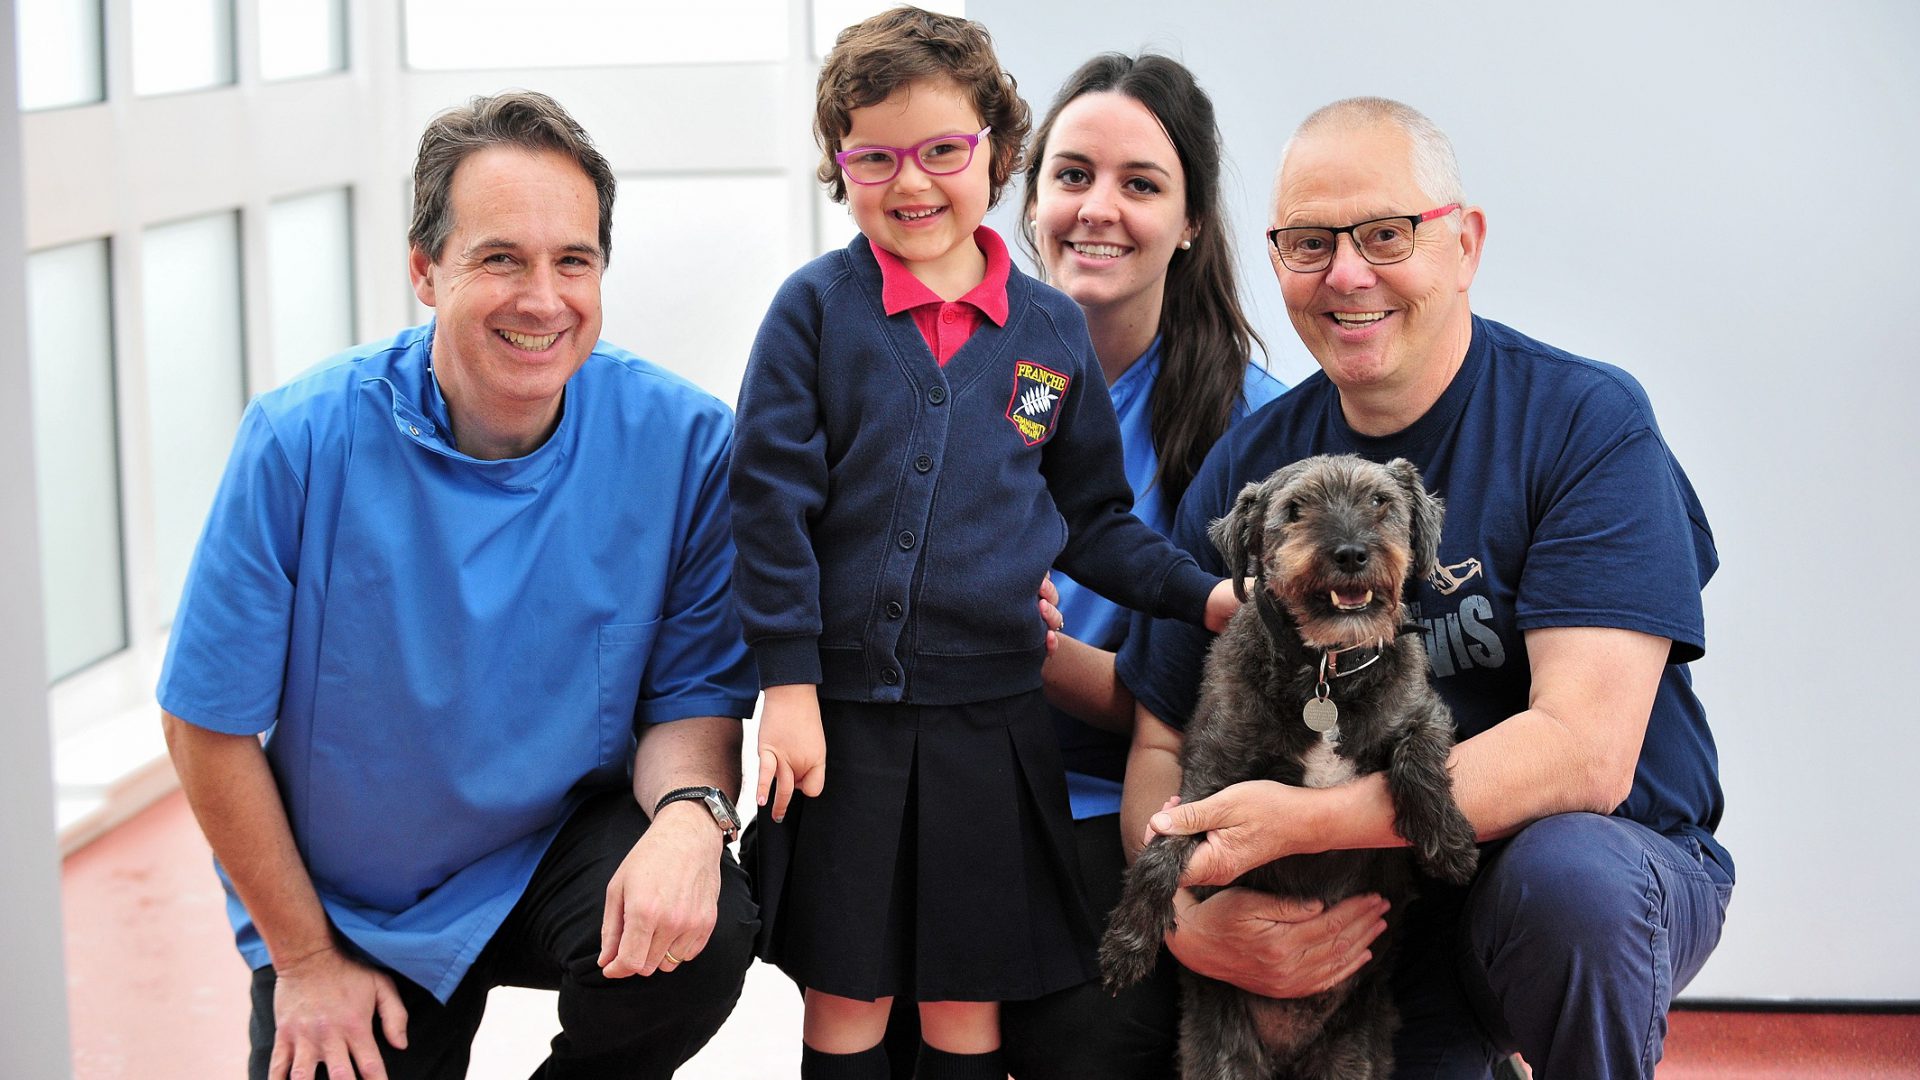 Terrier scales Ben Nevis for charity after lifechanging veterinary surgery